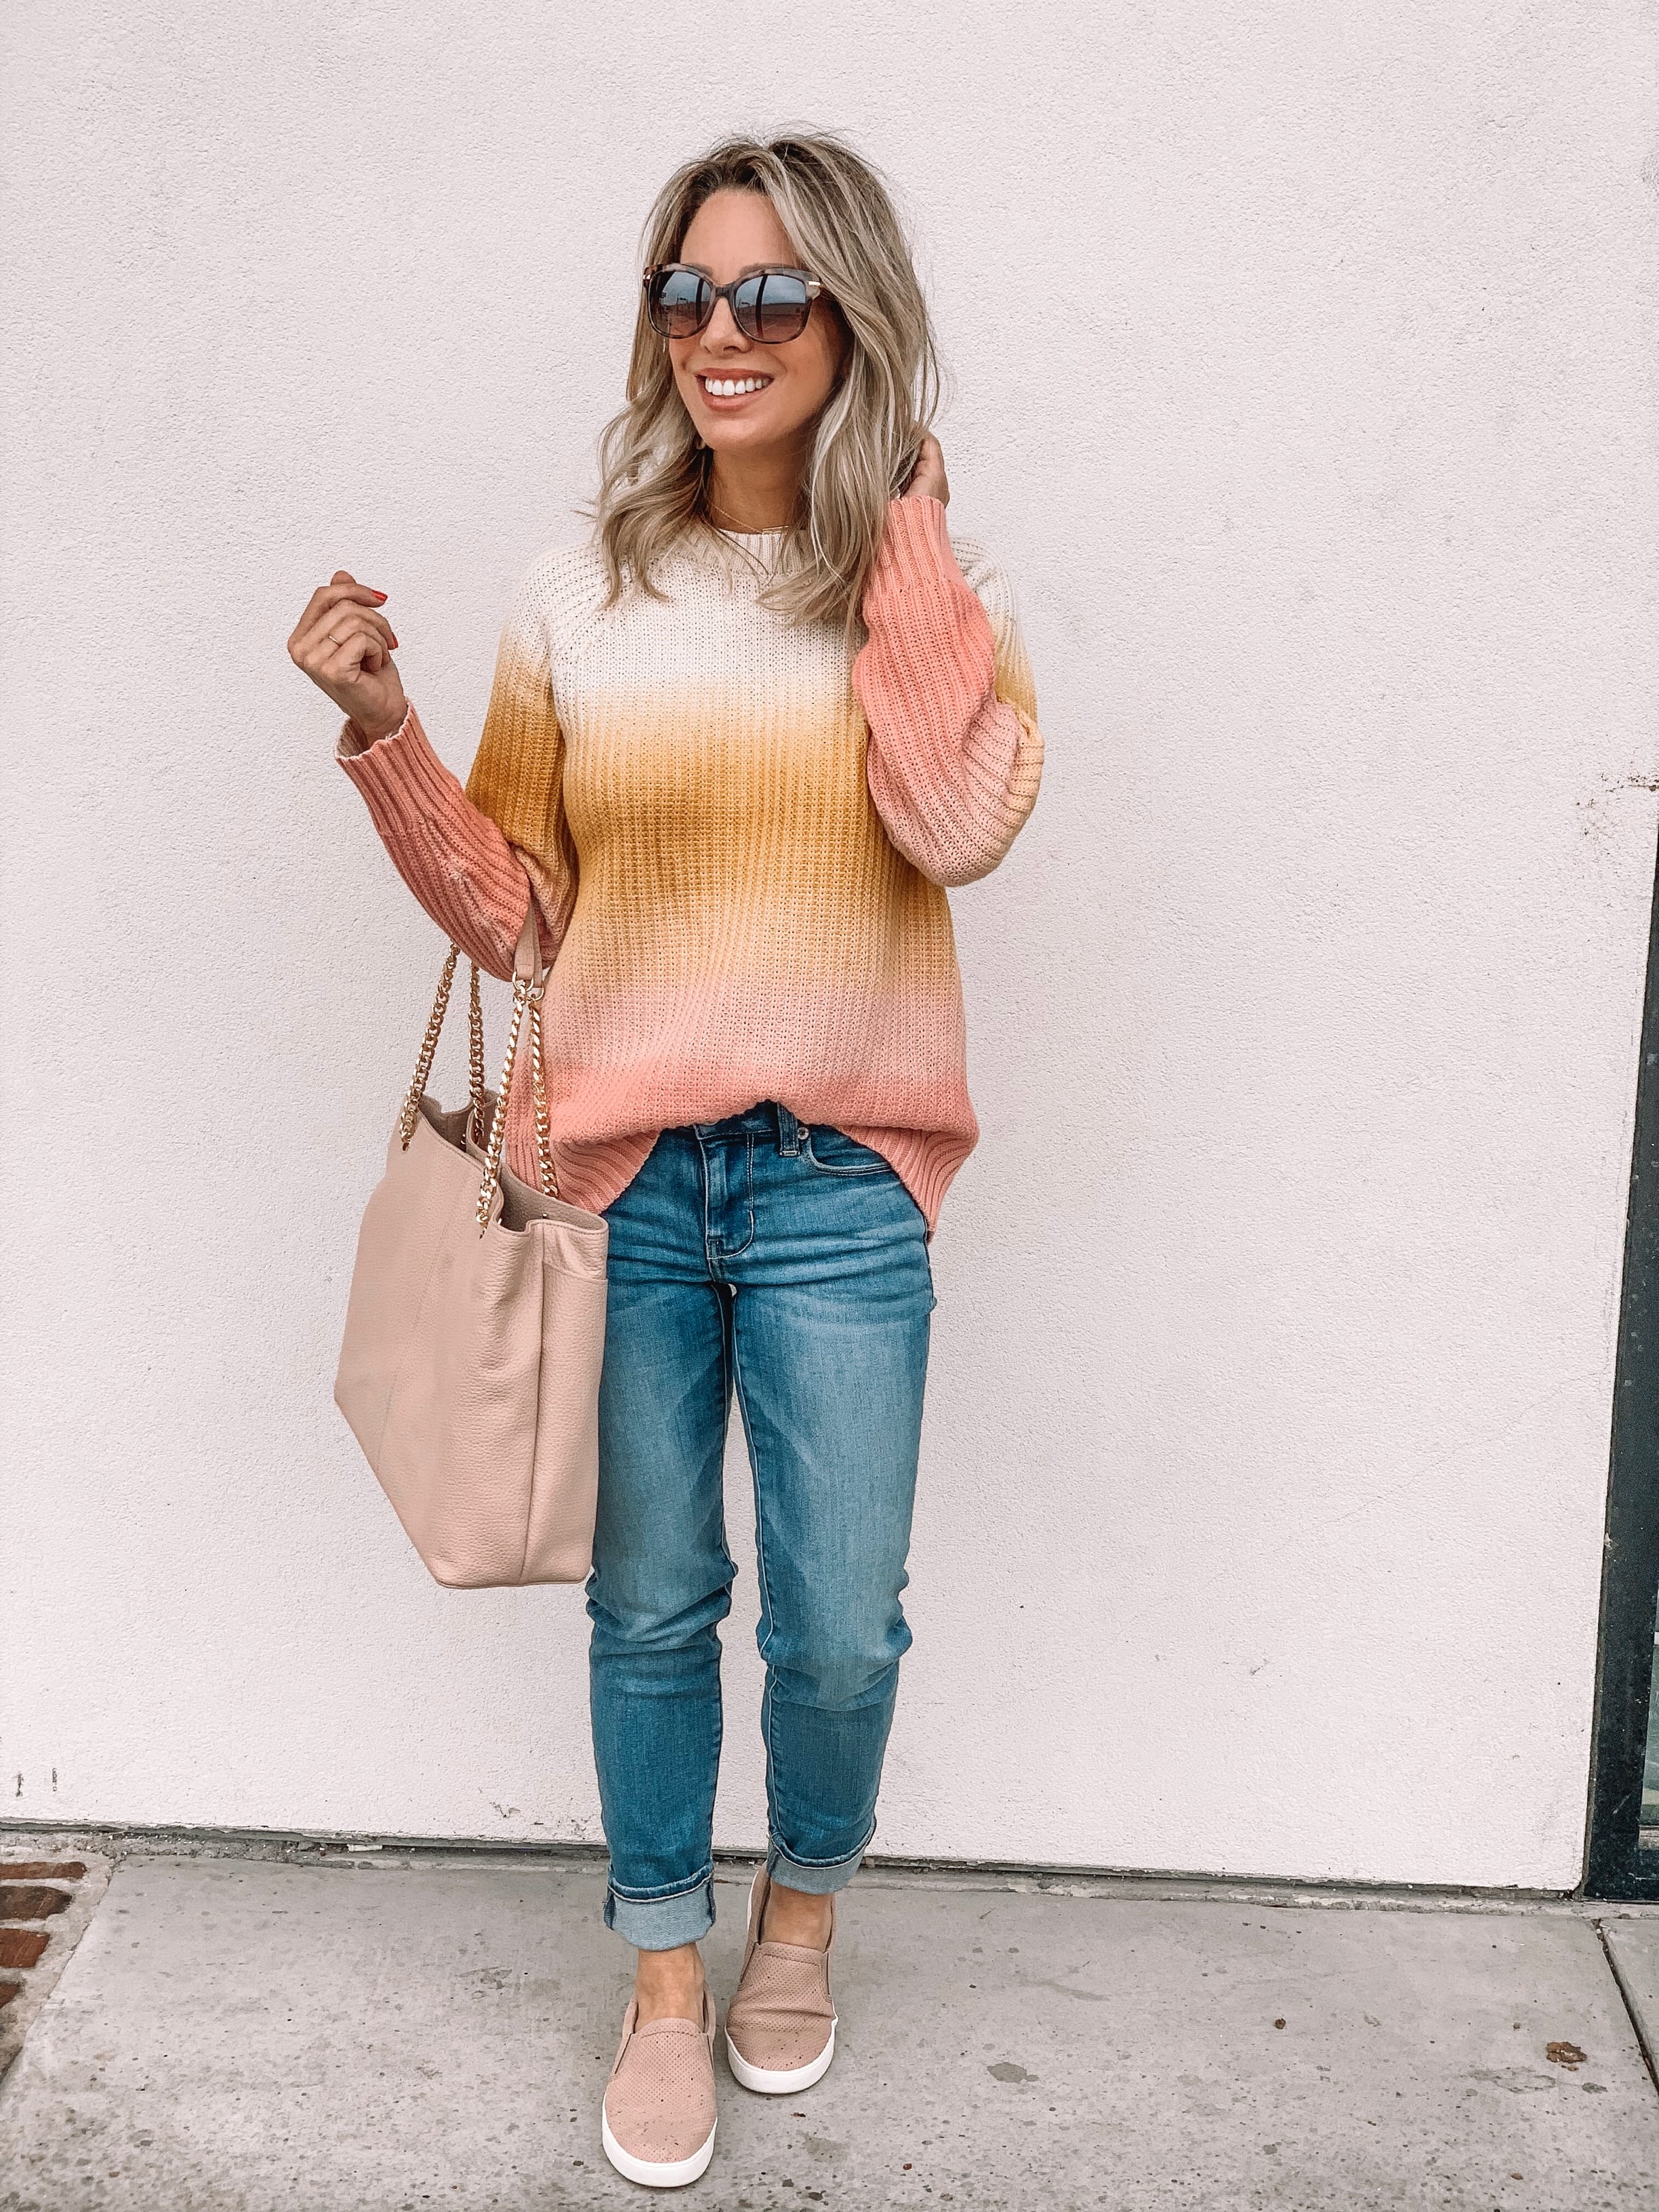 Jeans and striped sweater with pink slip on sneakers